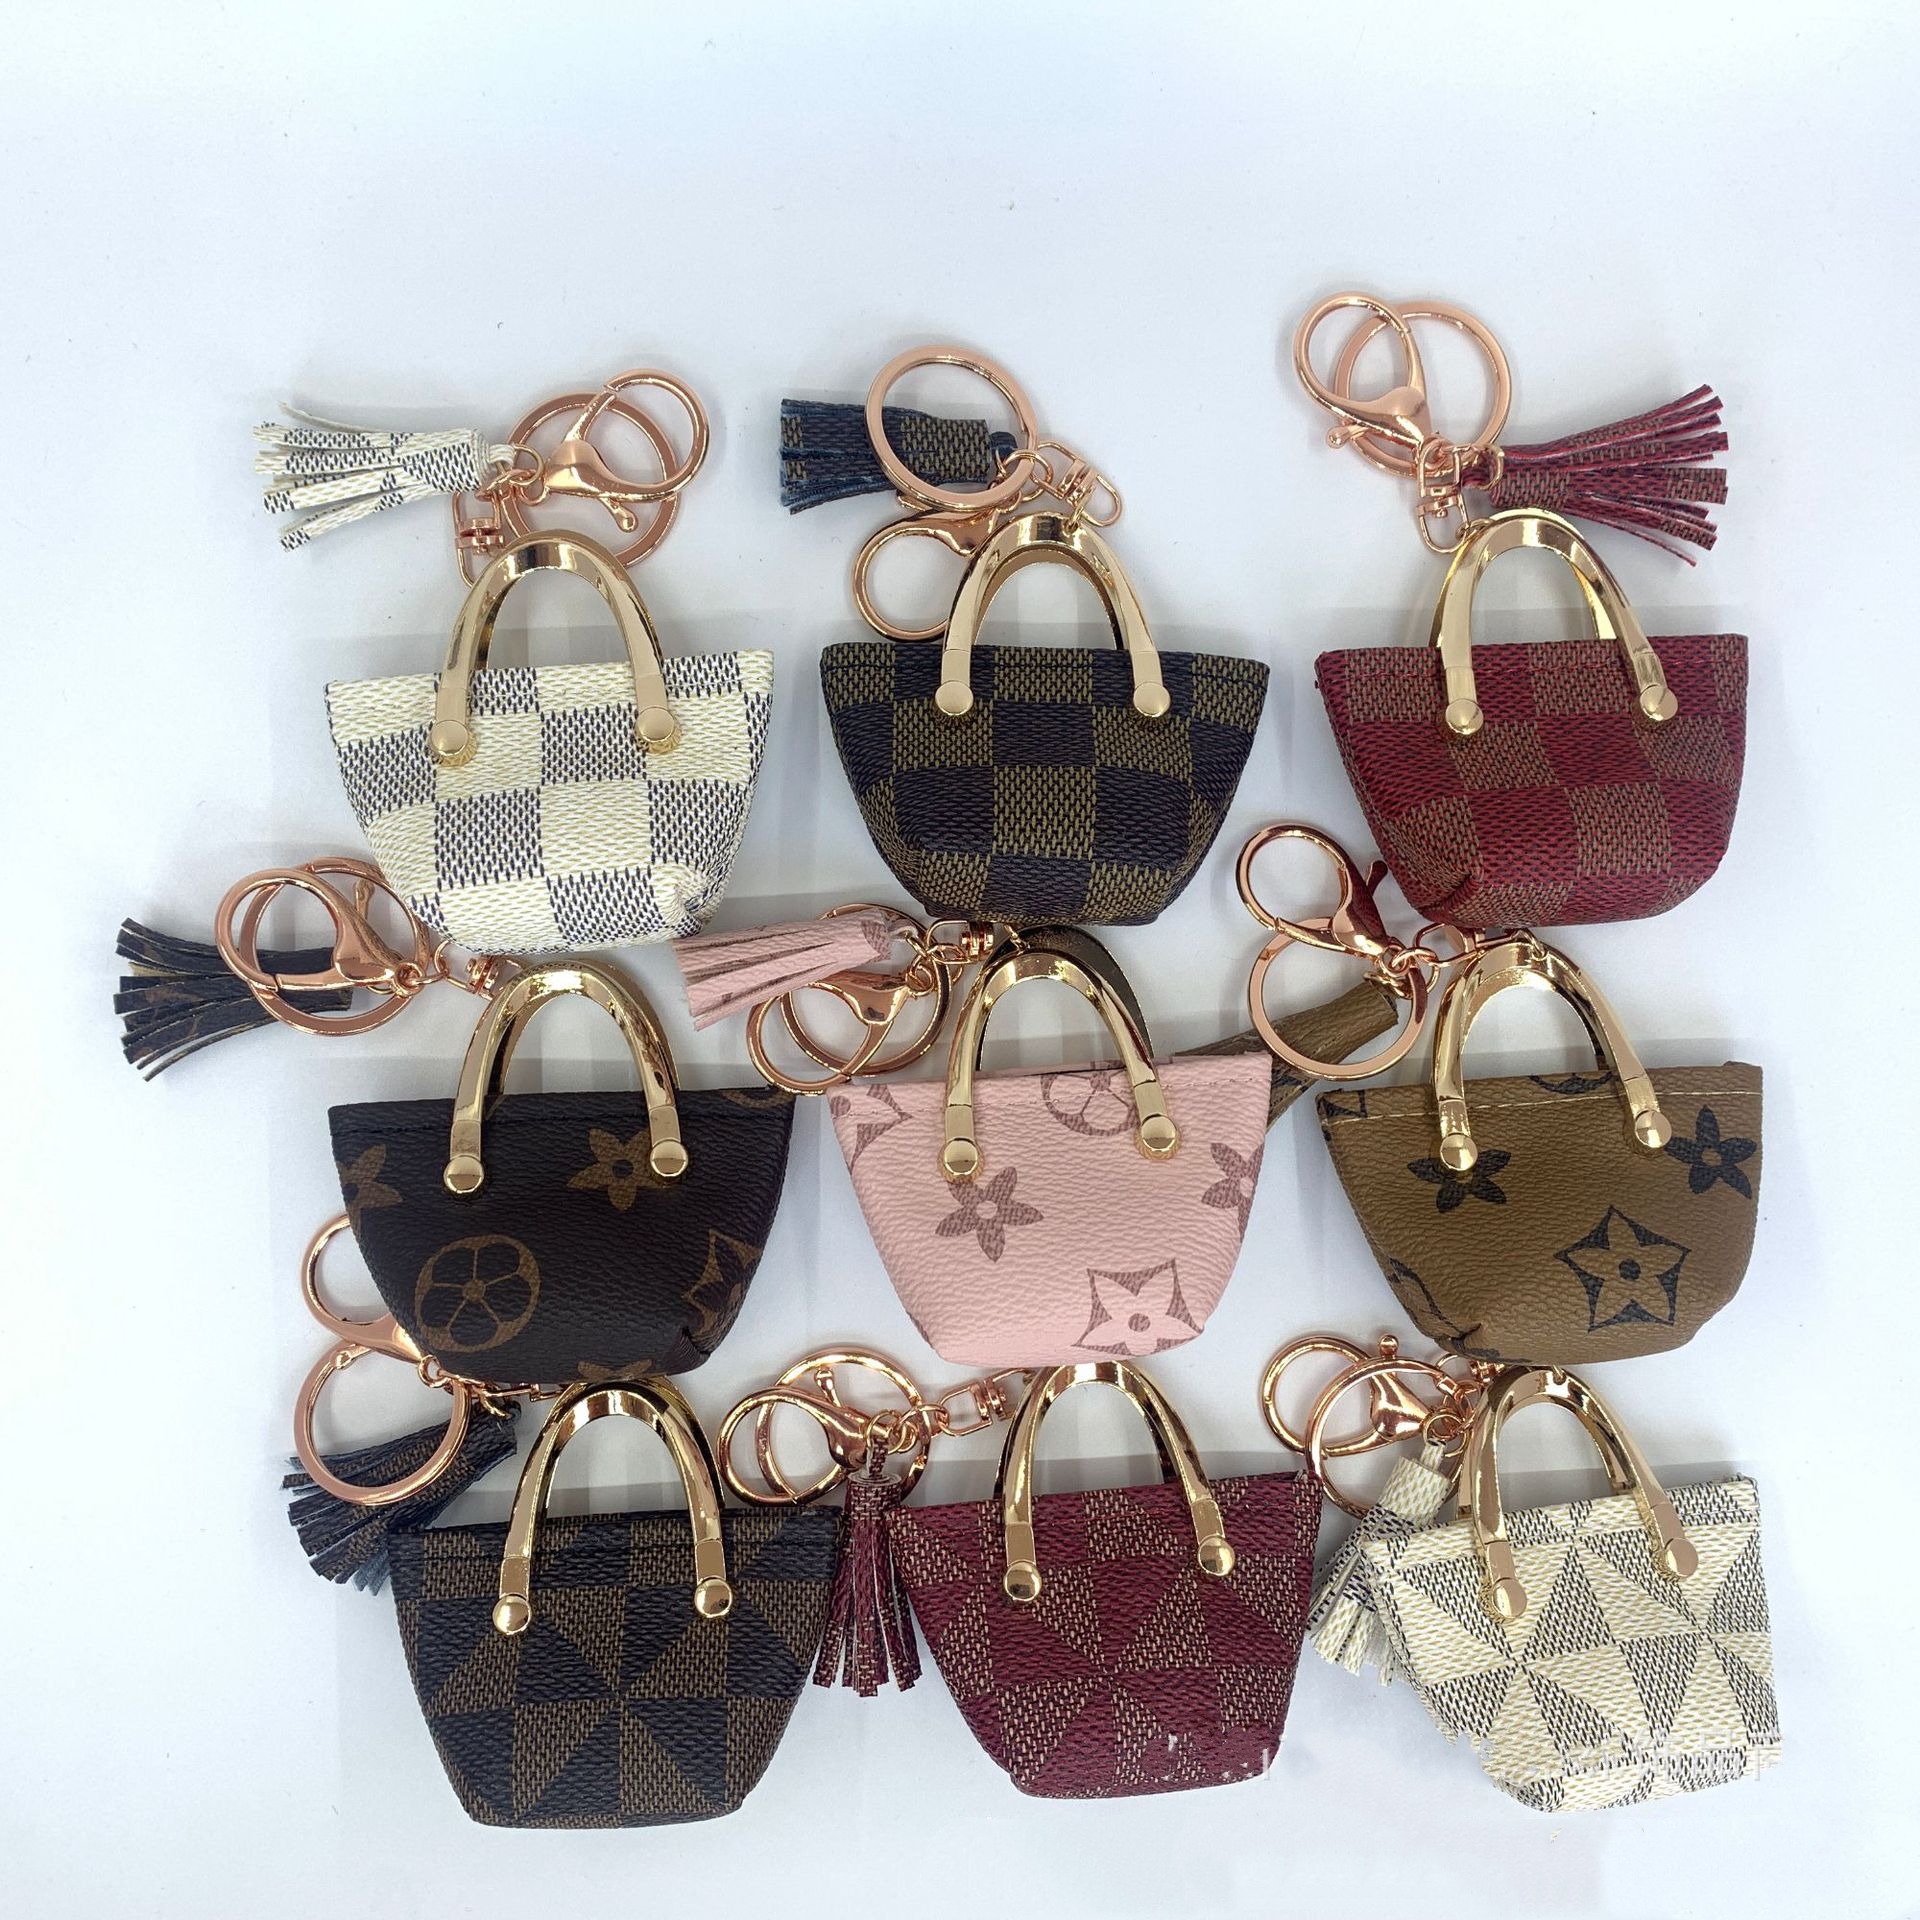 Mini Tote Bag Keychains Car Key Chains Rings Pink Brown Flower Triangle Plaid Tassel Pendant Holder Coin Purses Fashion PU Leather Charm Gift Jewelry Accessories